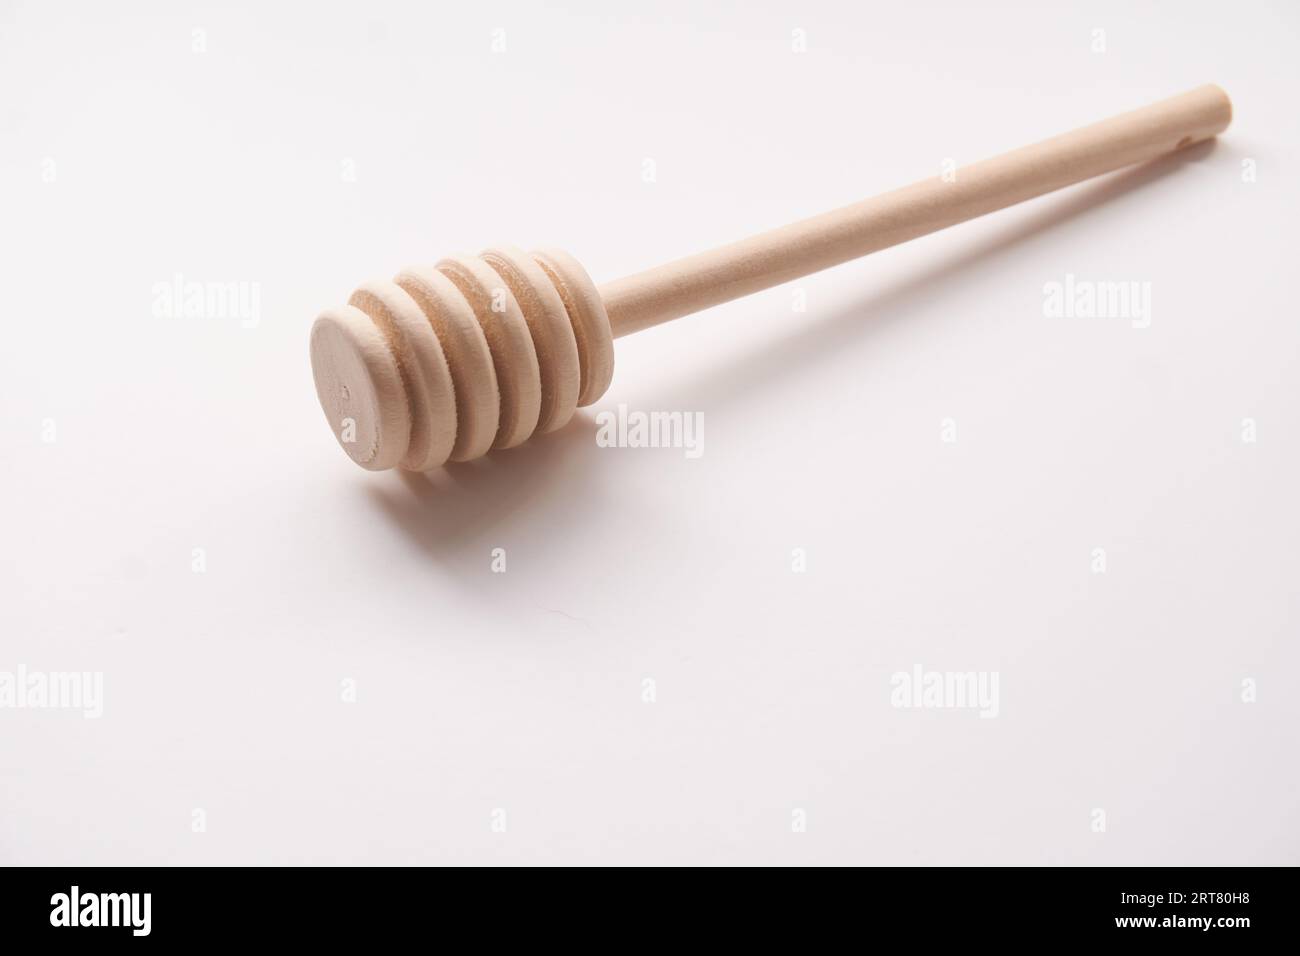 Wooden Honey Dipper isolated on a white background Stock Photo